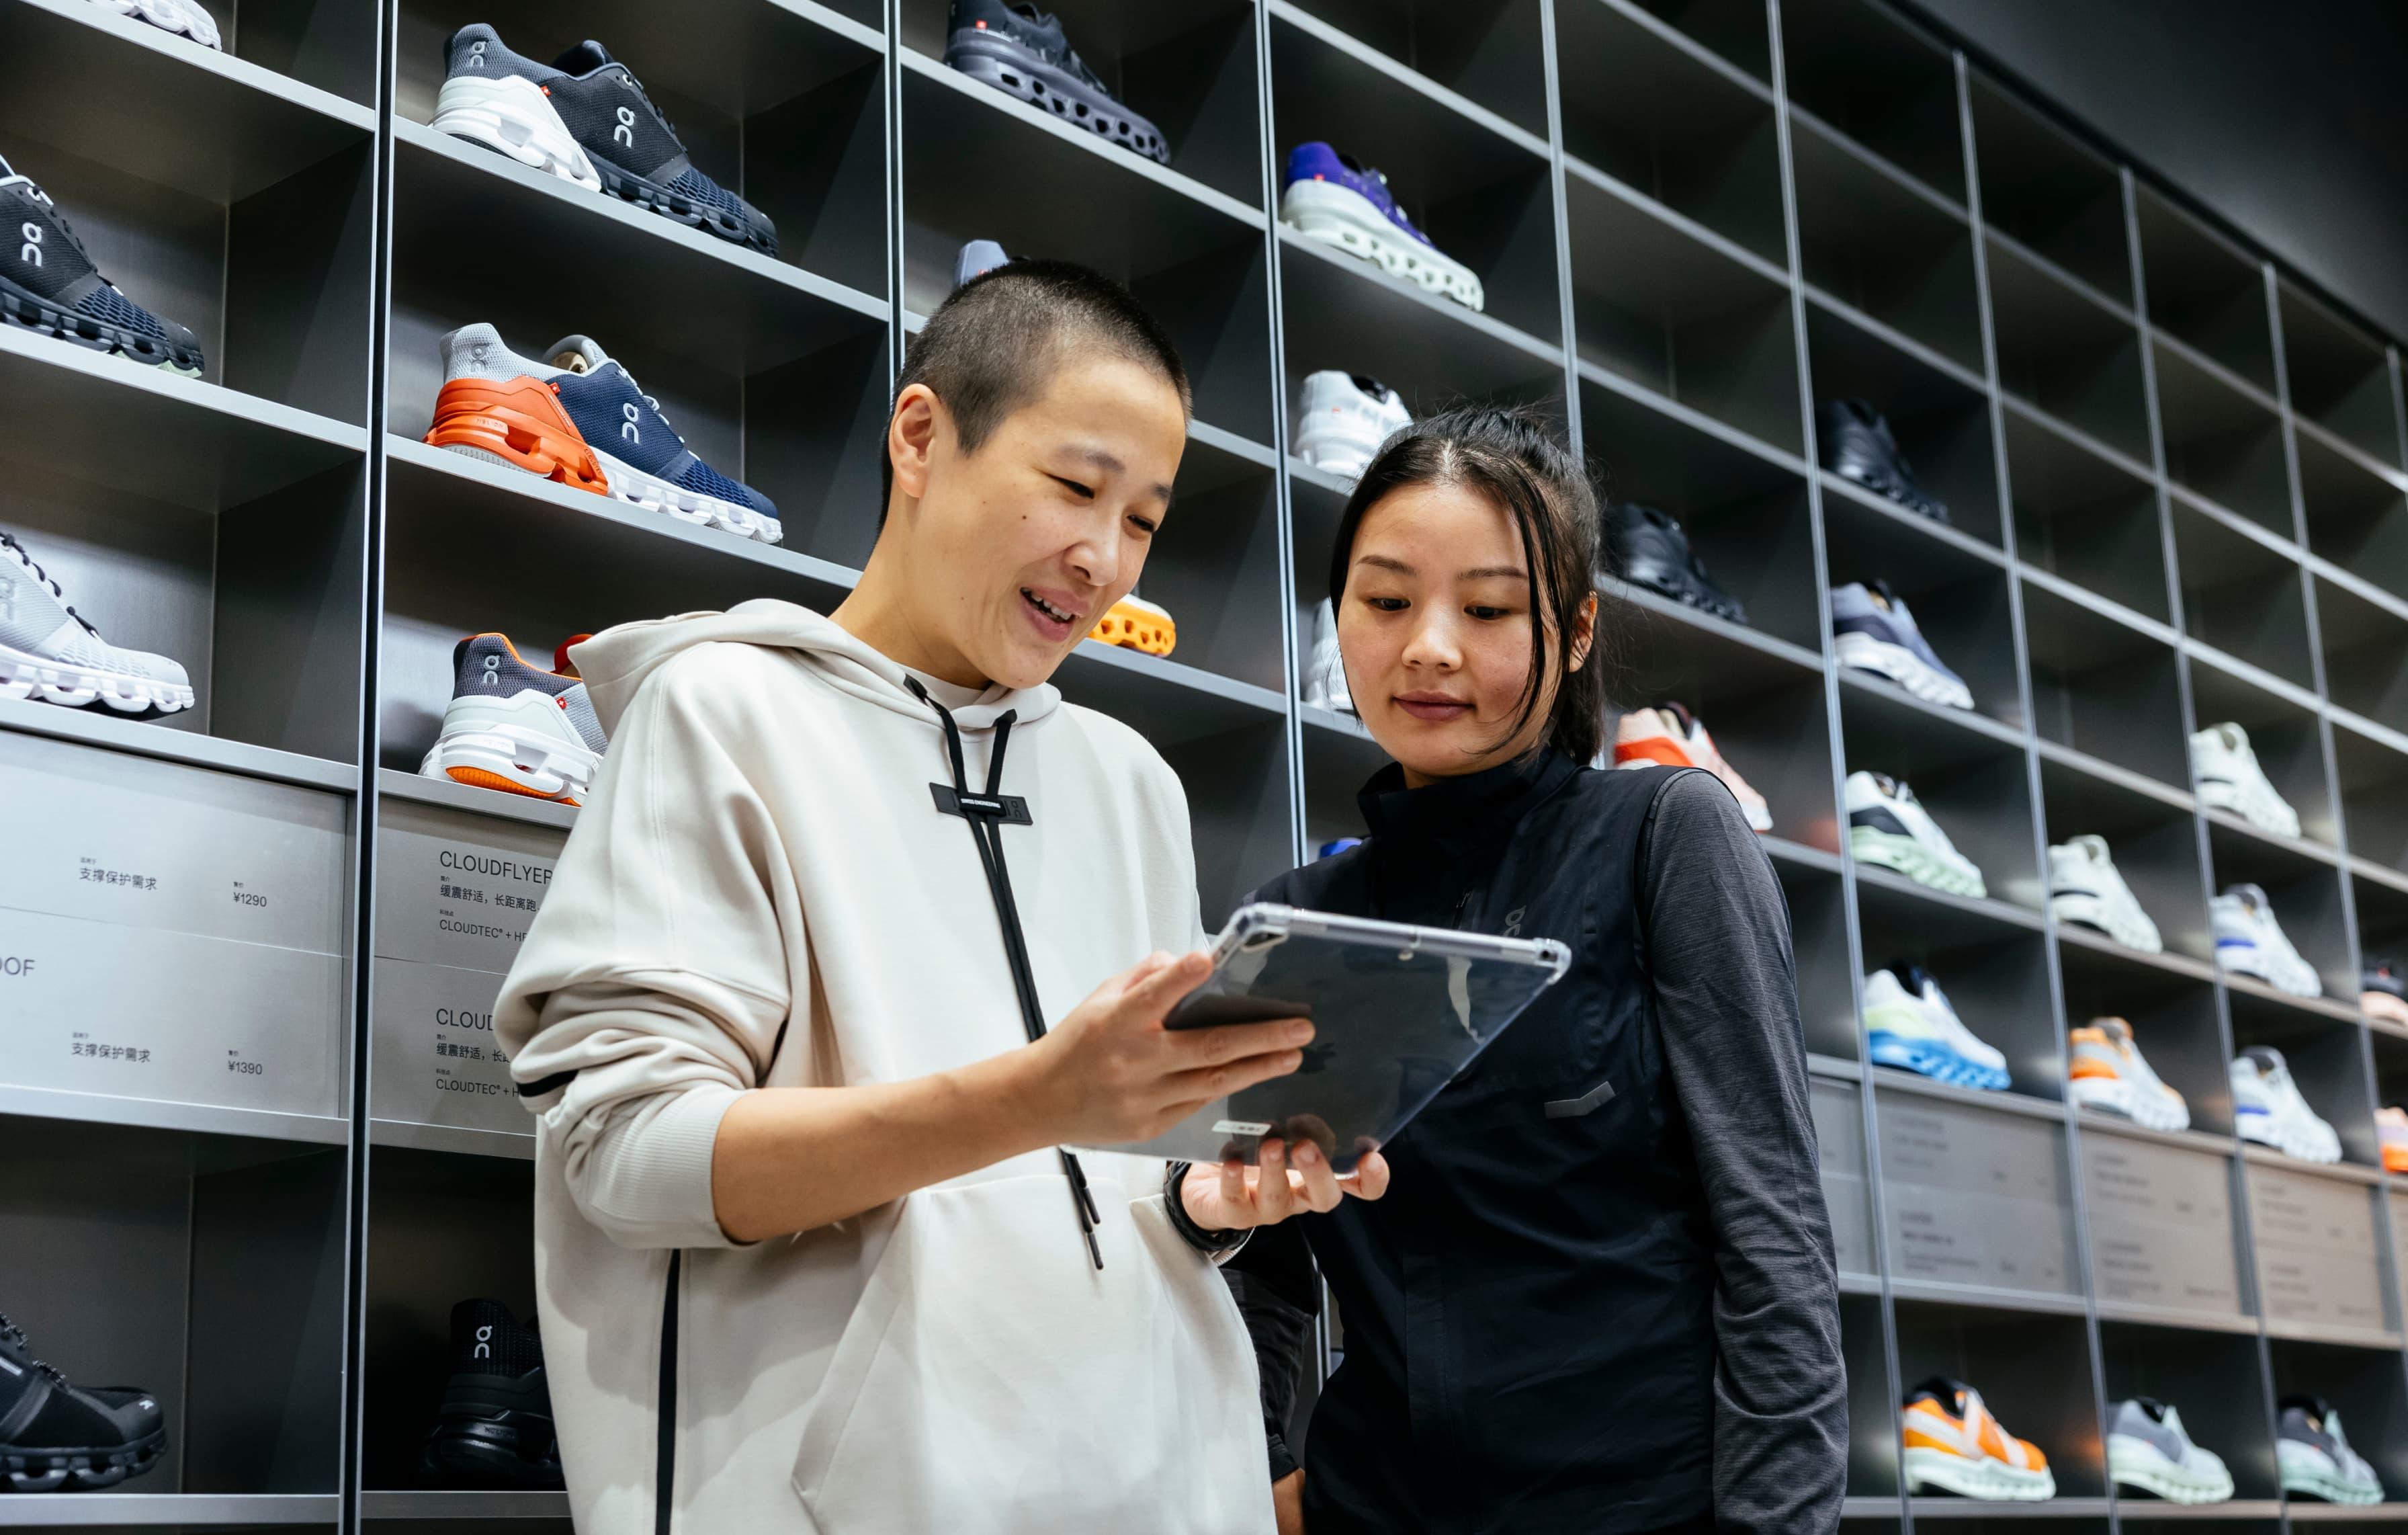 Two people looking at a laptop with rows of running shoes behind them